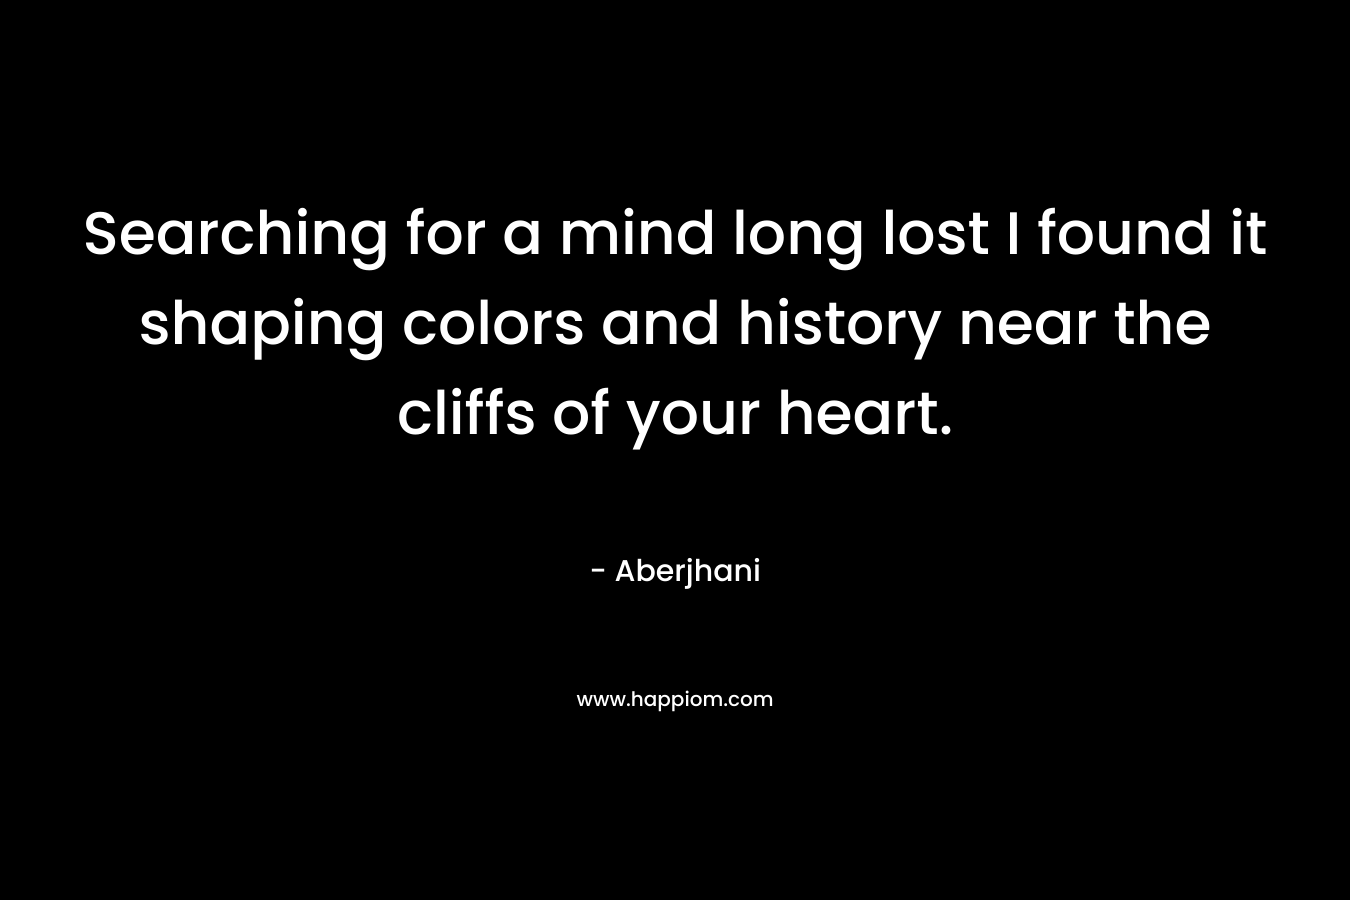 Searching for a mind long lost I found it shaping colors and history near the cliffs of your heart. – Aberjhani